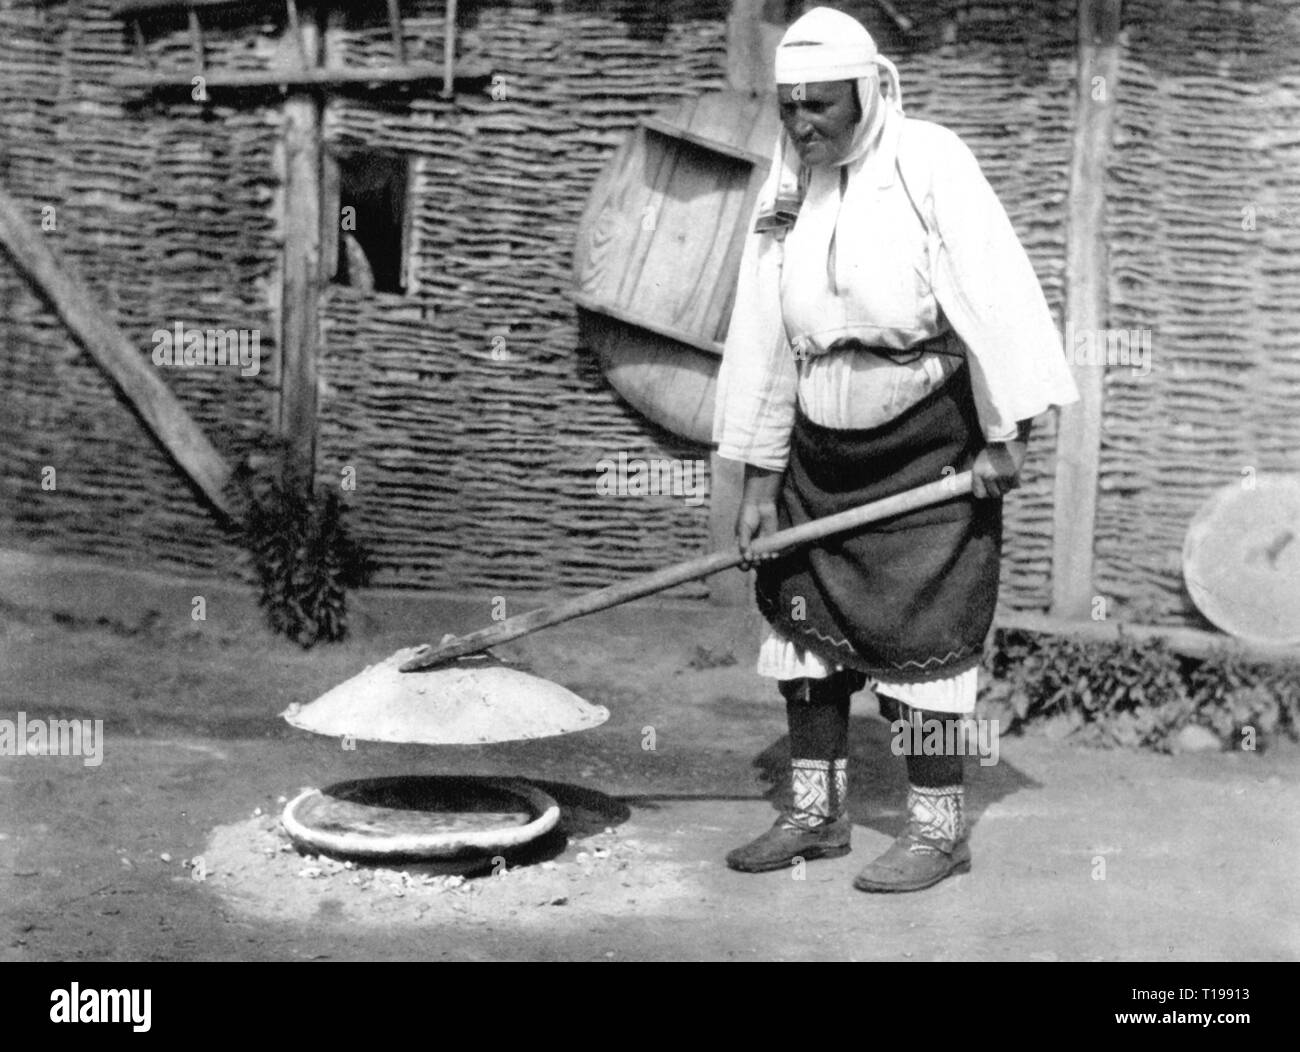 geography / travel historic, Albania, people, an old woman is baking bread, region around Mamurras, Atlantis, number 10, 1930, Albanians, immigrated from the Kosovo, immigrant, immigrants, Kosovians, agriculture, farming, country life, bowl, bowls, ash, ashes, ash heap, foodstuff, food, handwork, handiwork, handiworks, Mamurrasi, ethnicity, ethnic, ethnical, ethnicities, full-length, full length, female, national costume, national costumes, folklore, Kingdom of Albania, the Balkans, Balkan Peninsula, Europe, 20th century, 1930s, woman, women, bak, Additional-Rights-Clearance-Info-Not-Available Stock Photo